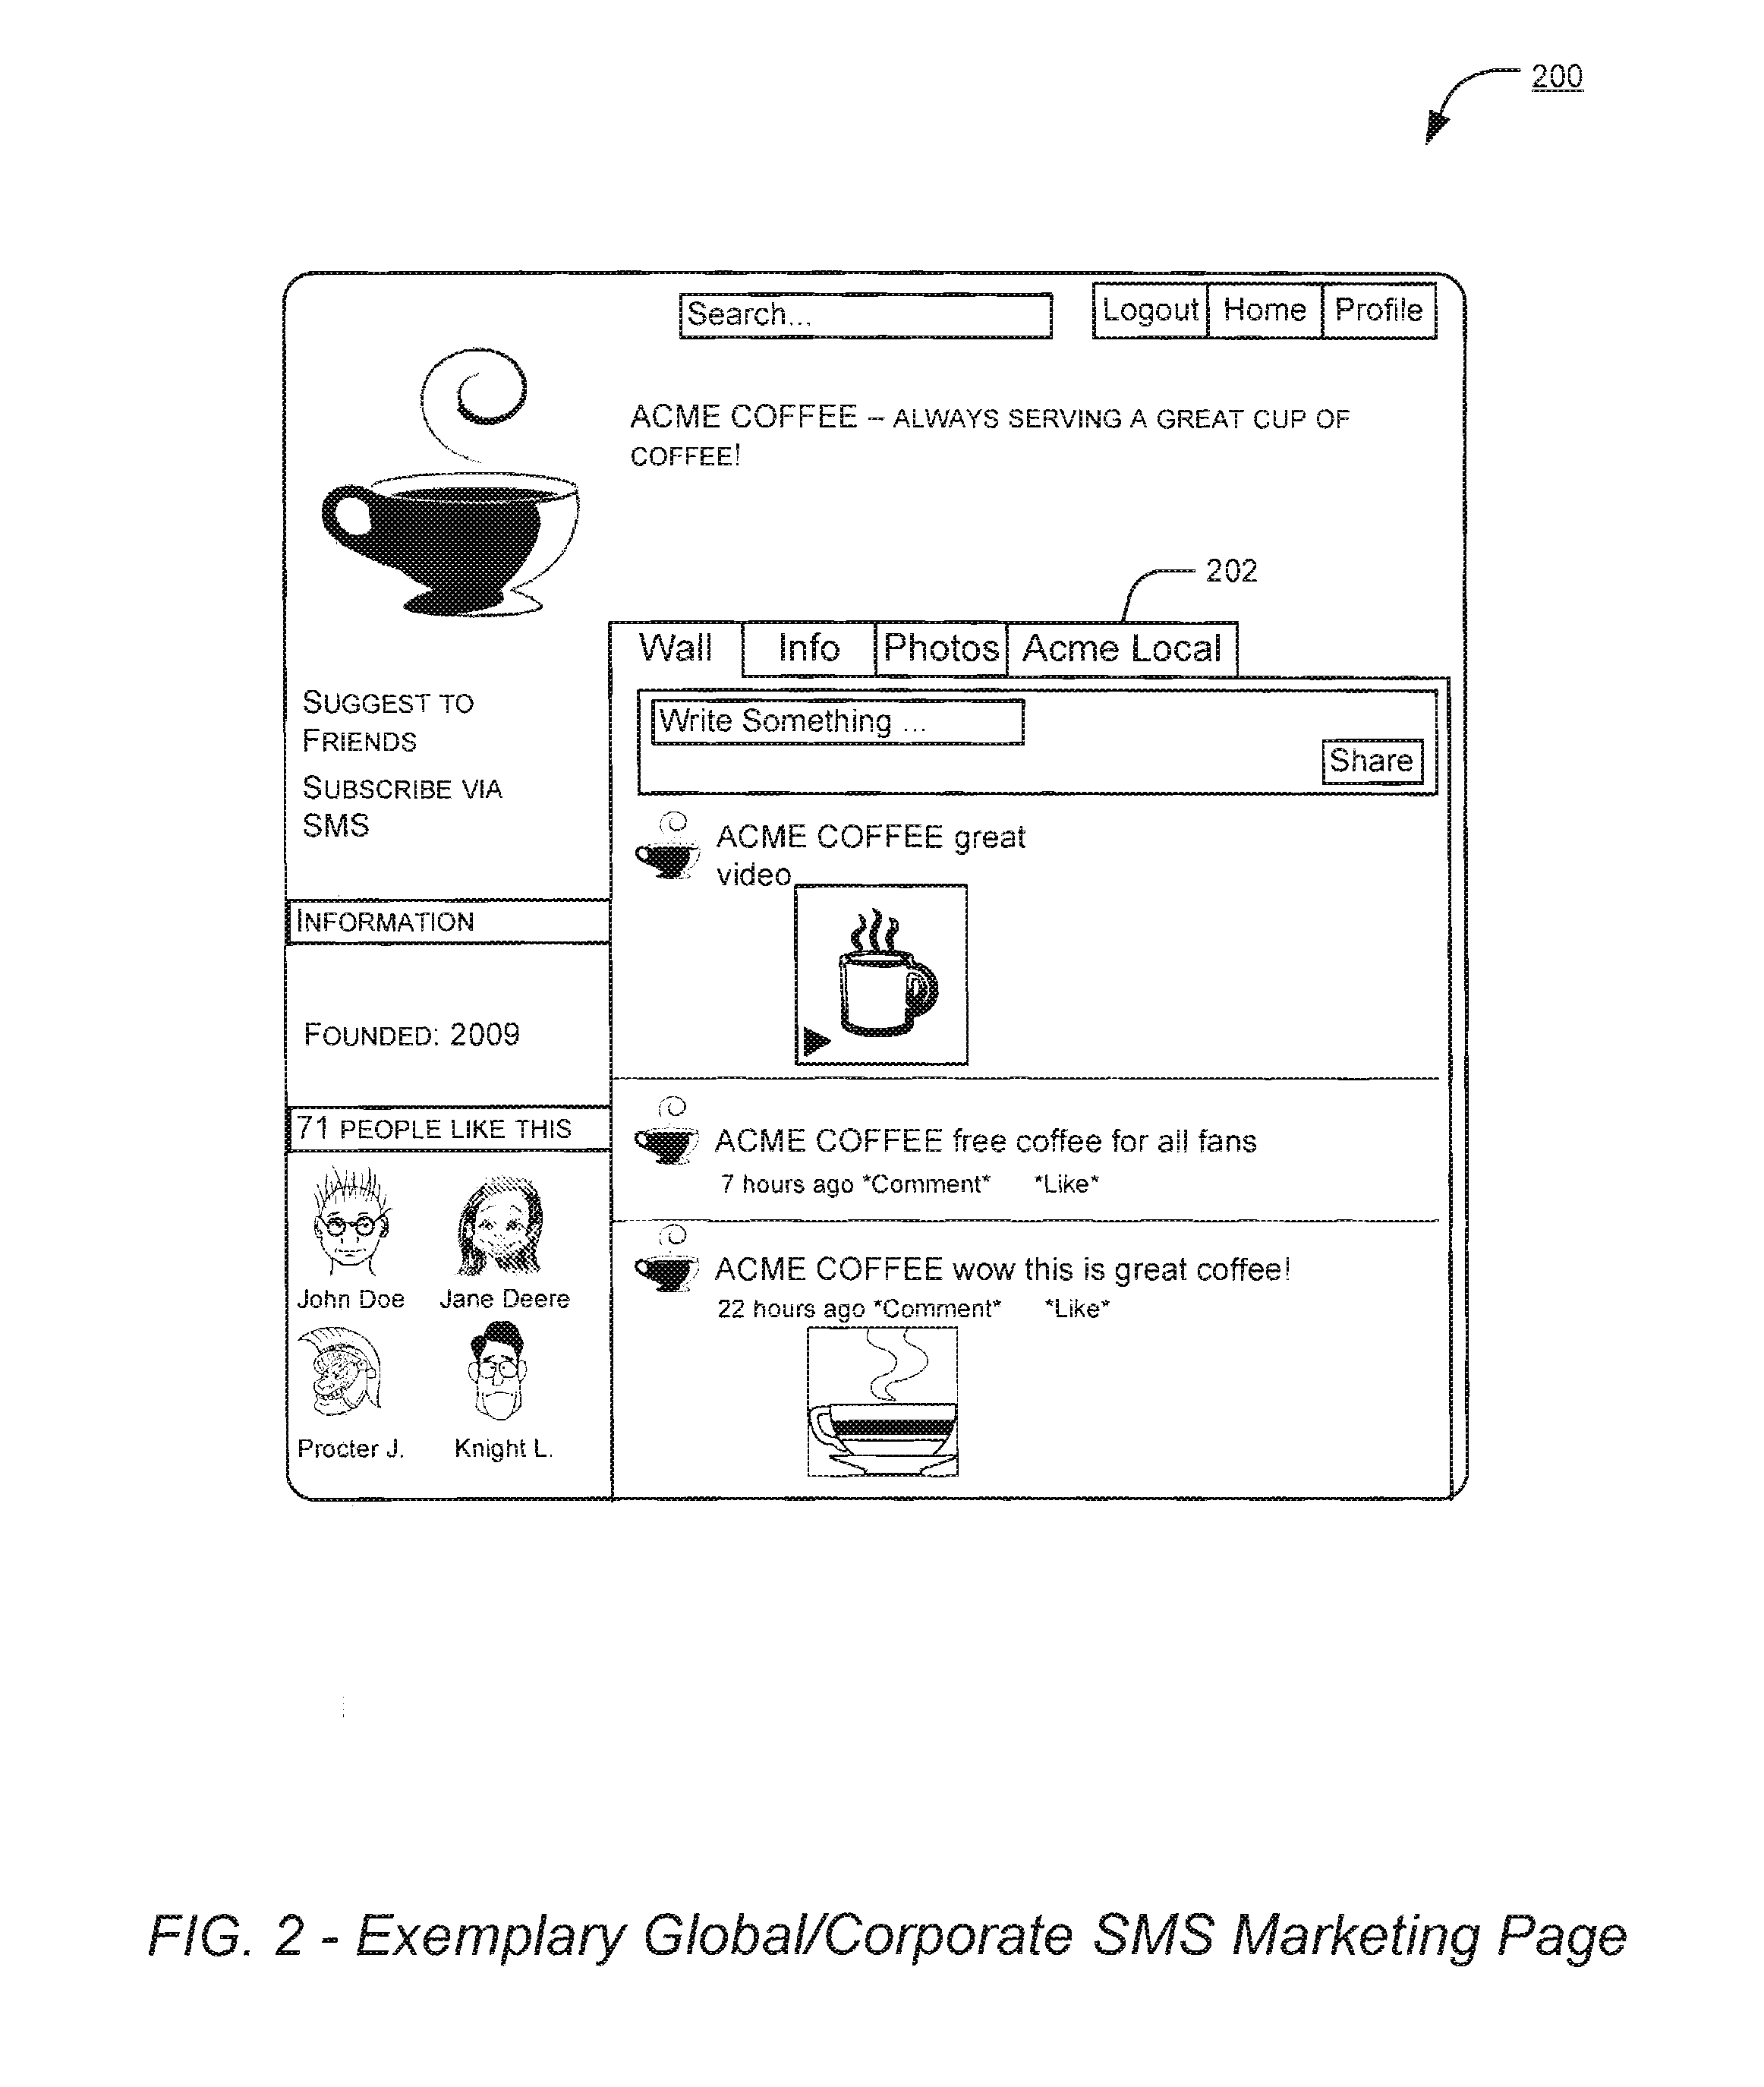 Systems and methods for managing content associated with multiple brand categories within a social media system